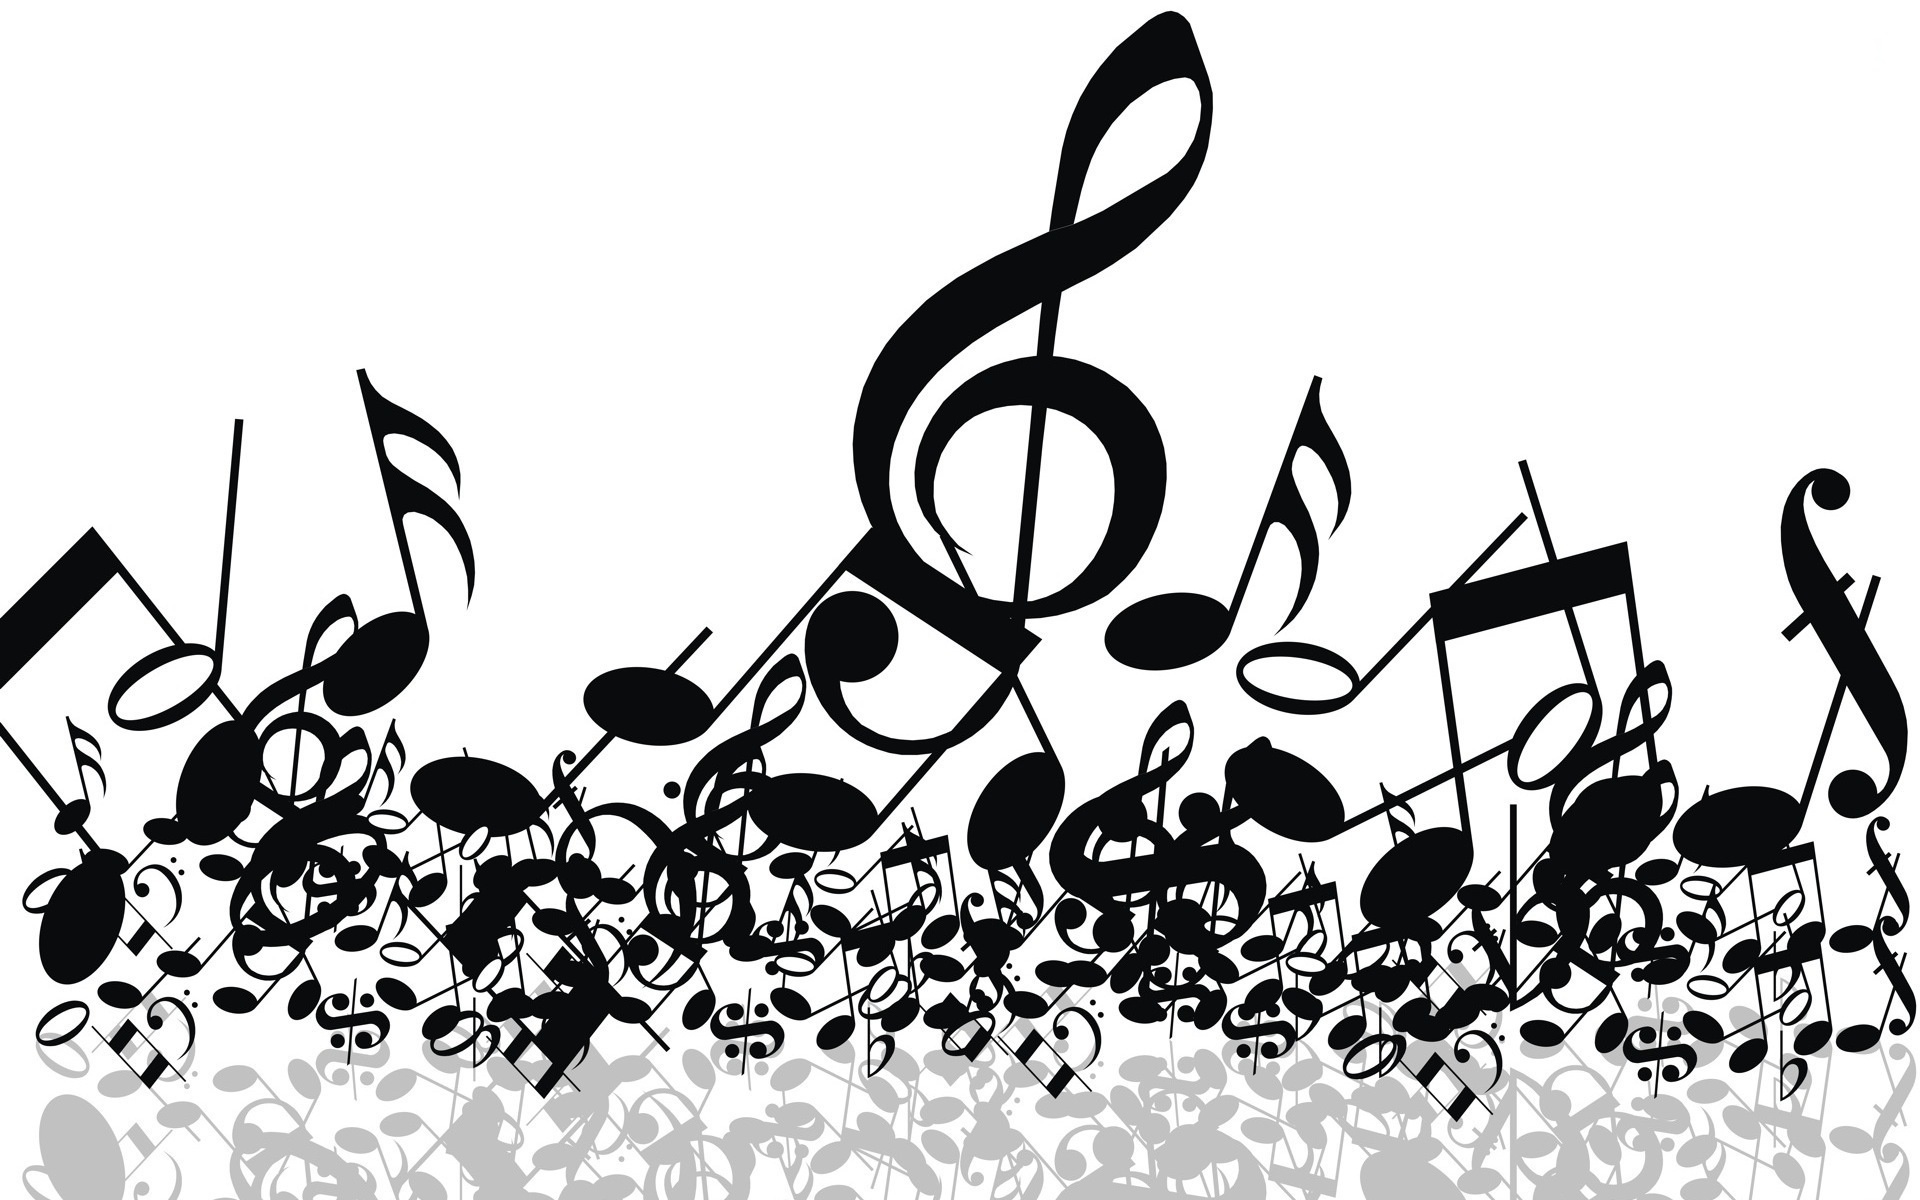 Band spring concert clipart image